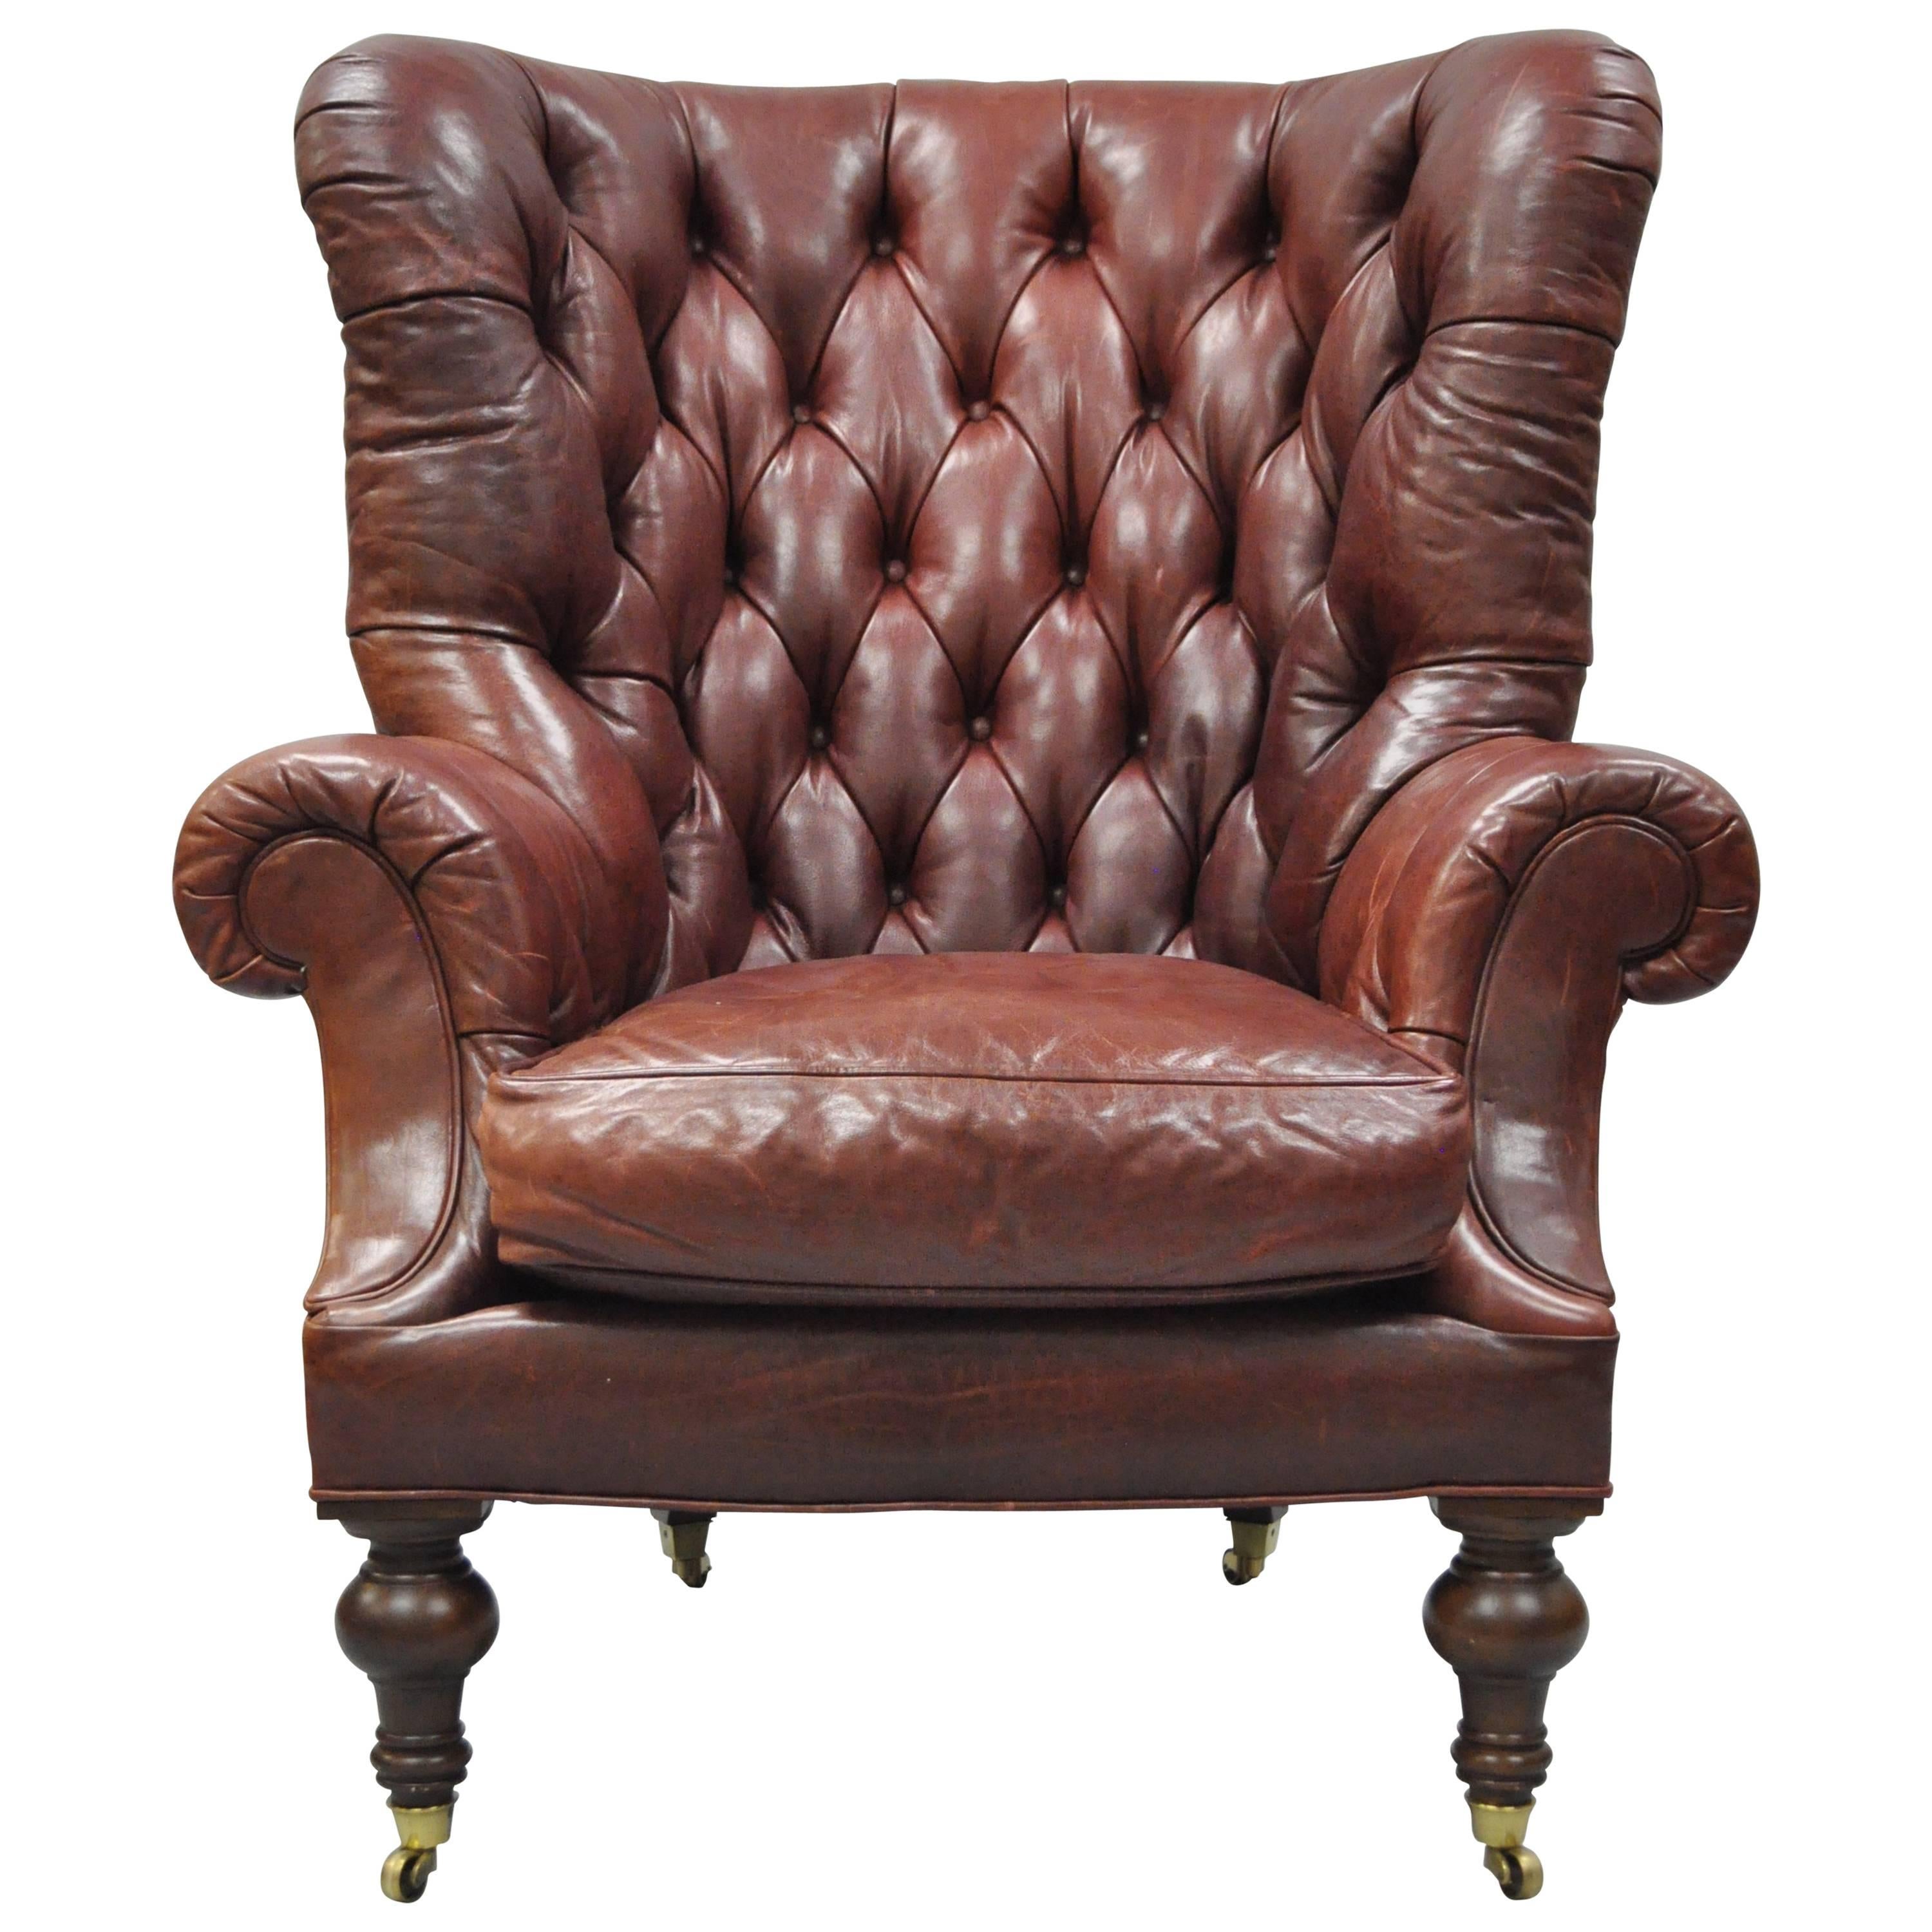 Oversized Lillian August Brown Tufted, Oversized Leather Chairs